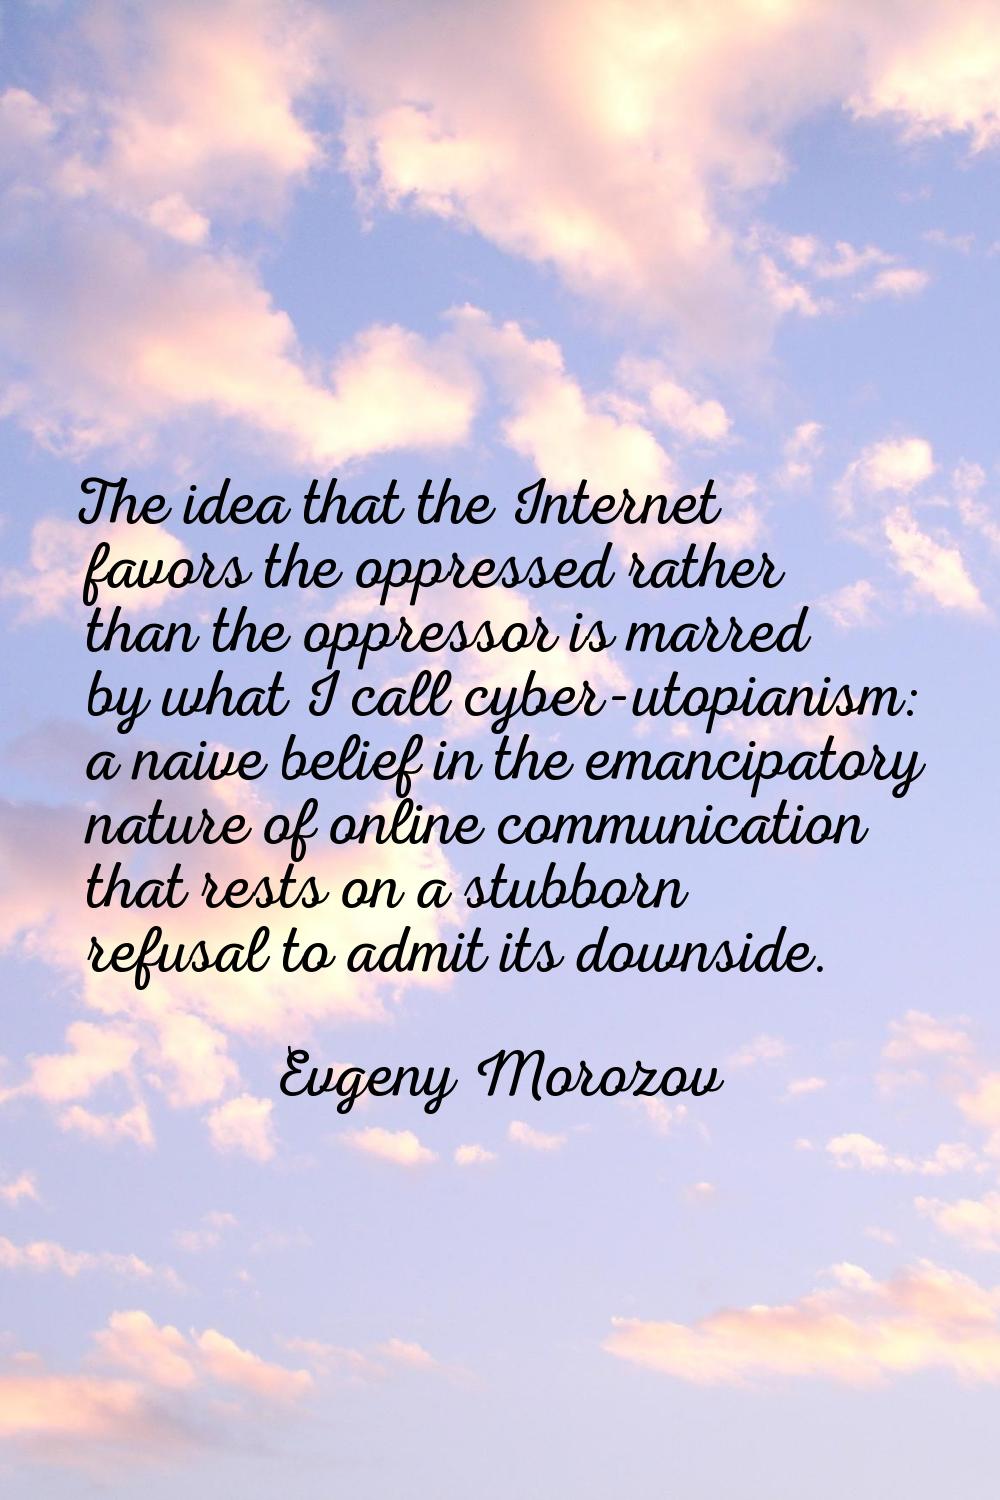 The idea that the Internet favors the oppressed rather than the oppressor is marred by what I call 